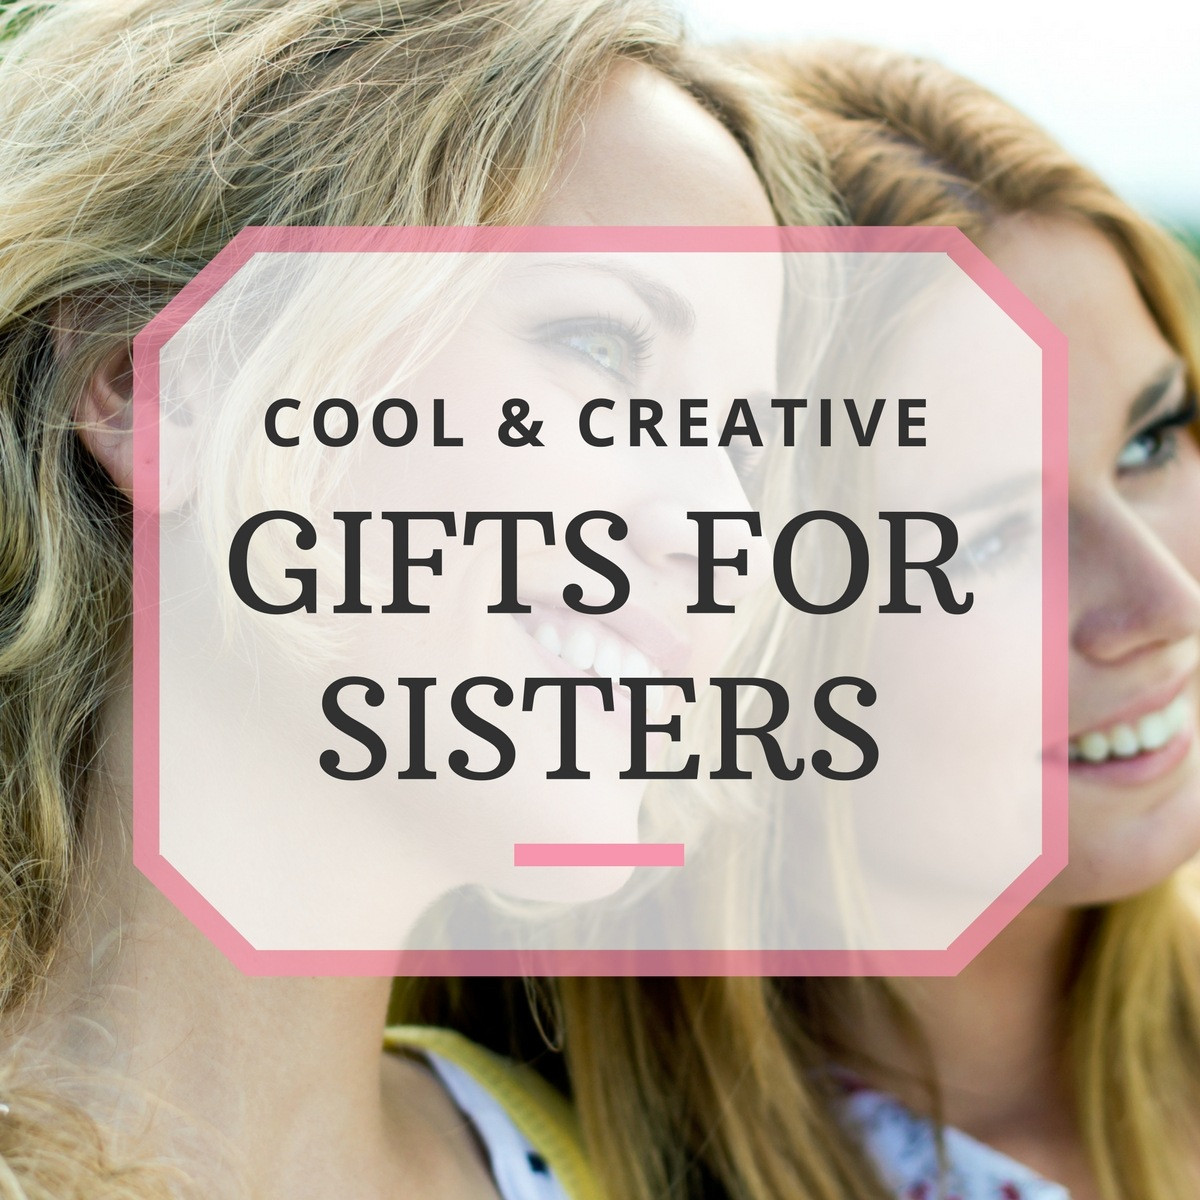 Best Gift Ideas For Sister
 10 Great Gift Ideas for Sisters Sentimental Practical